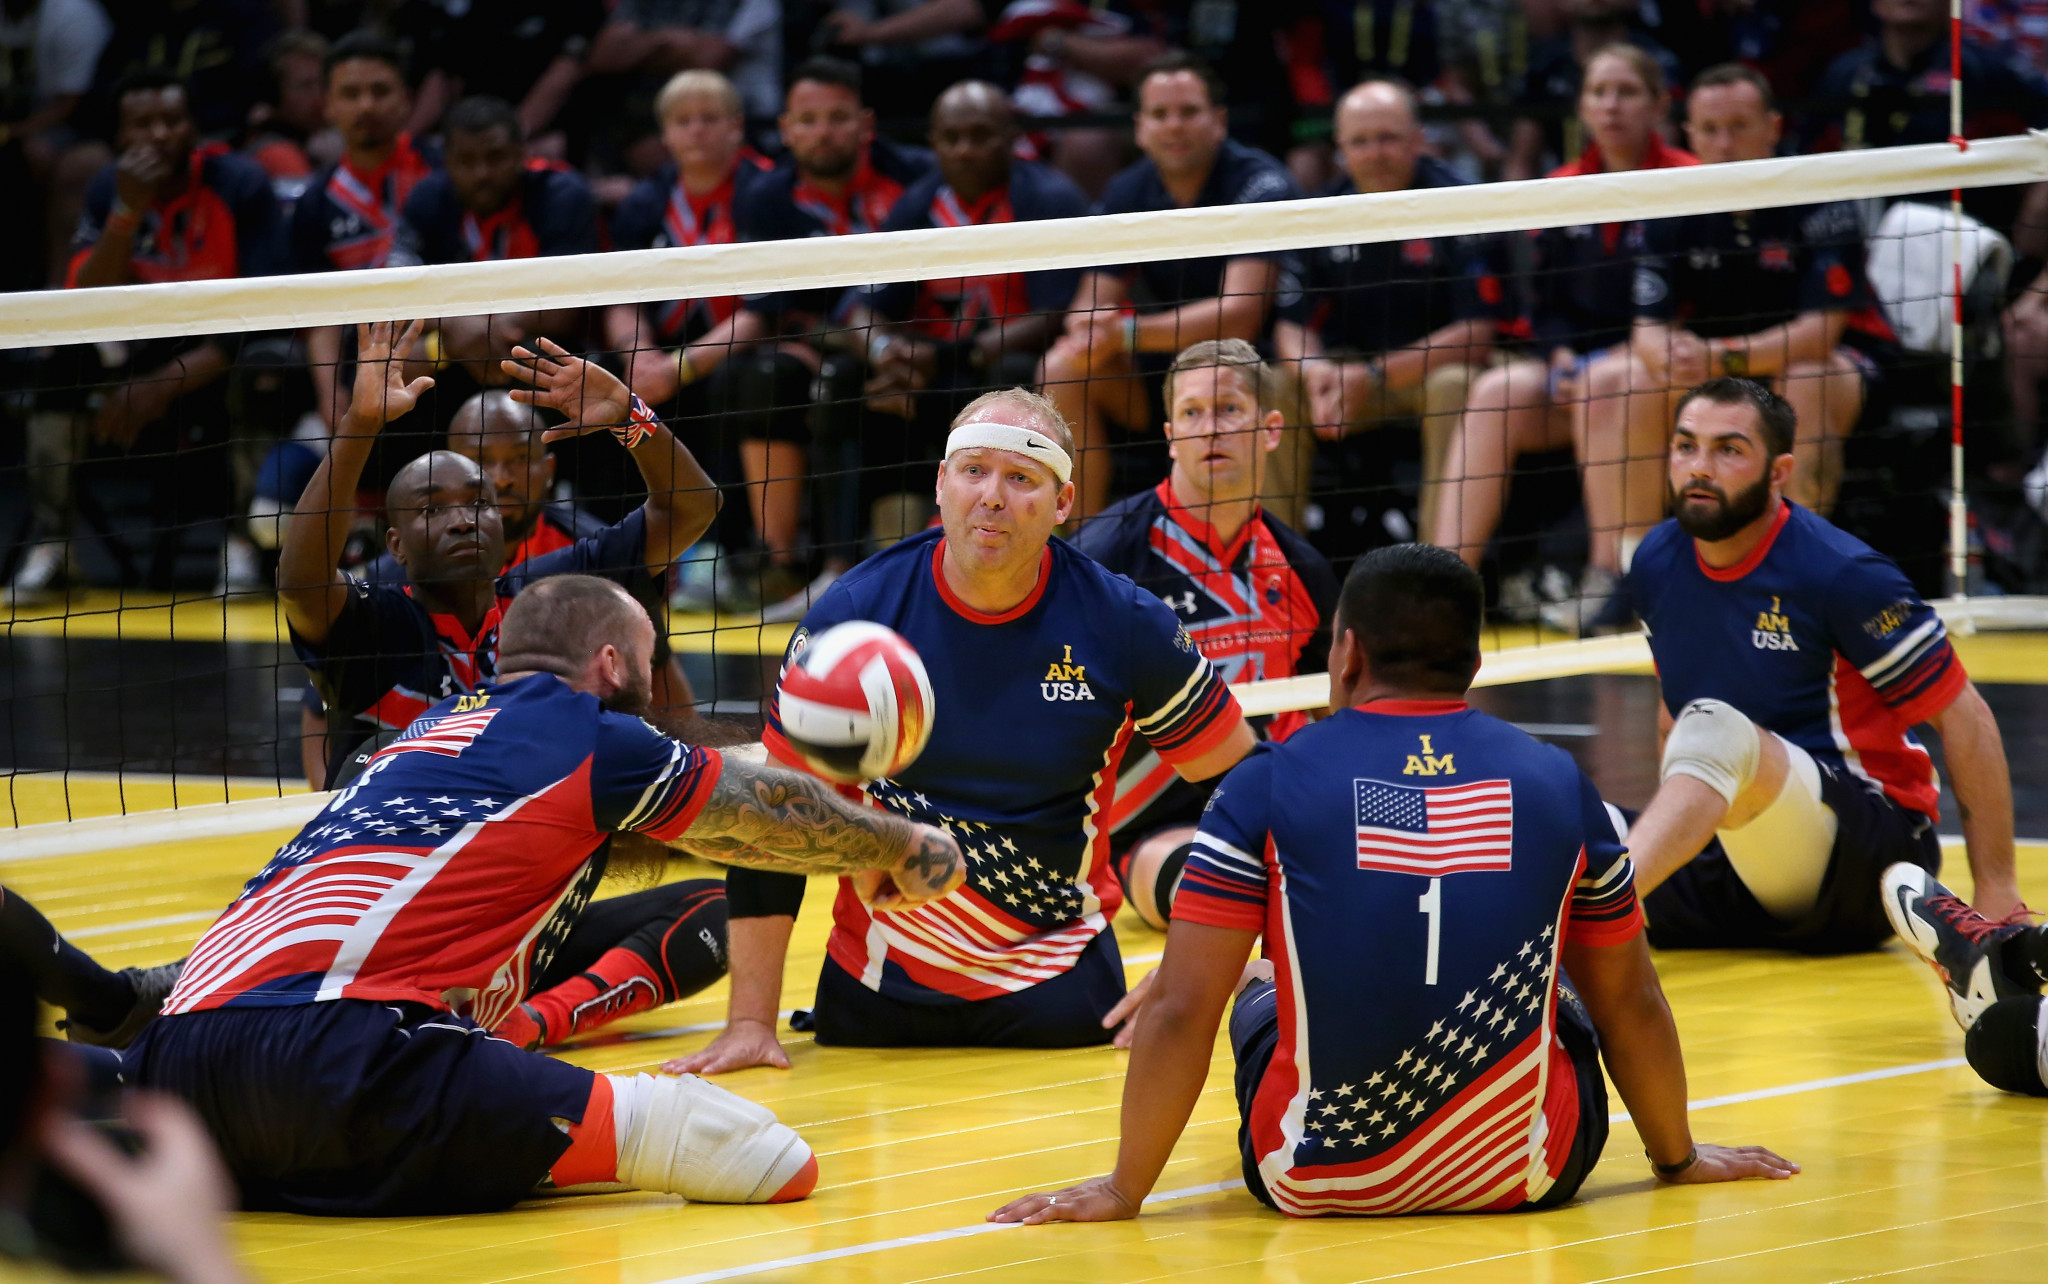 The Invictus Games in The Hague will take place in May and June next year ©Getty Images